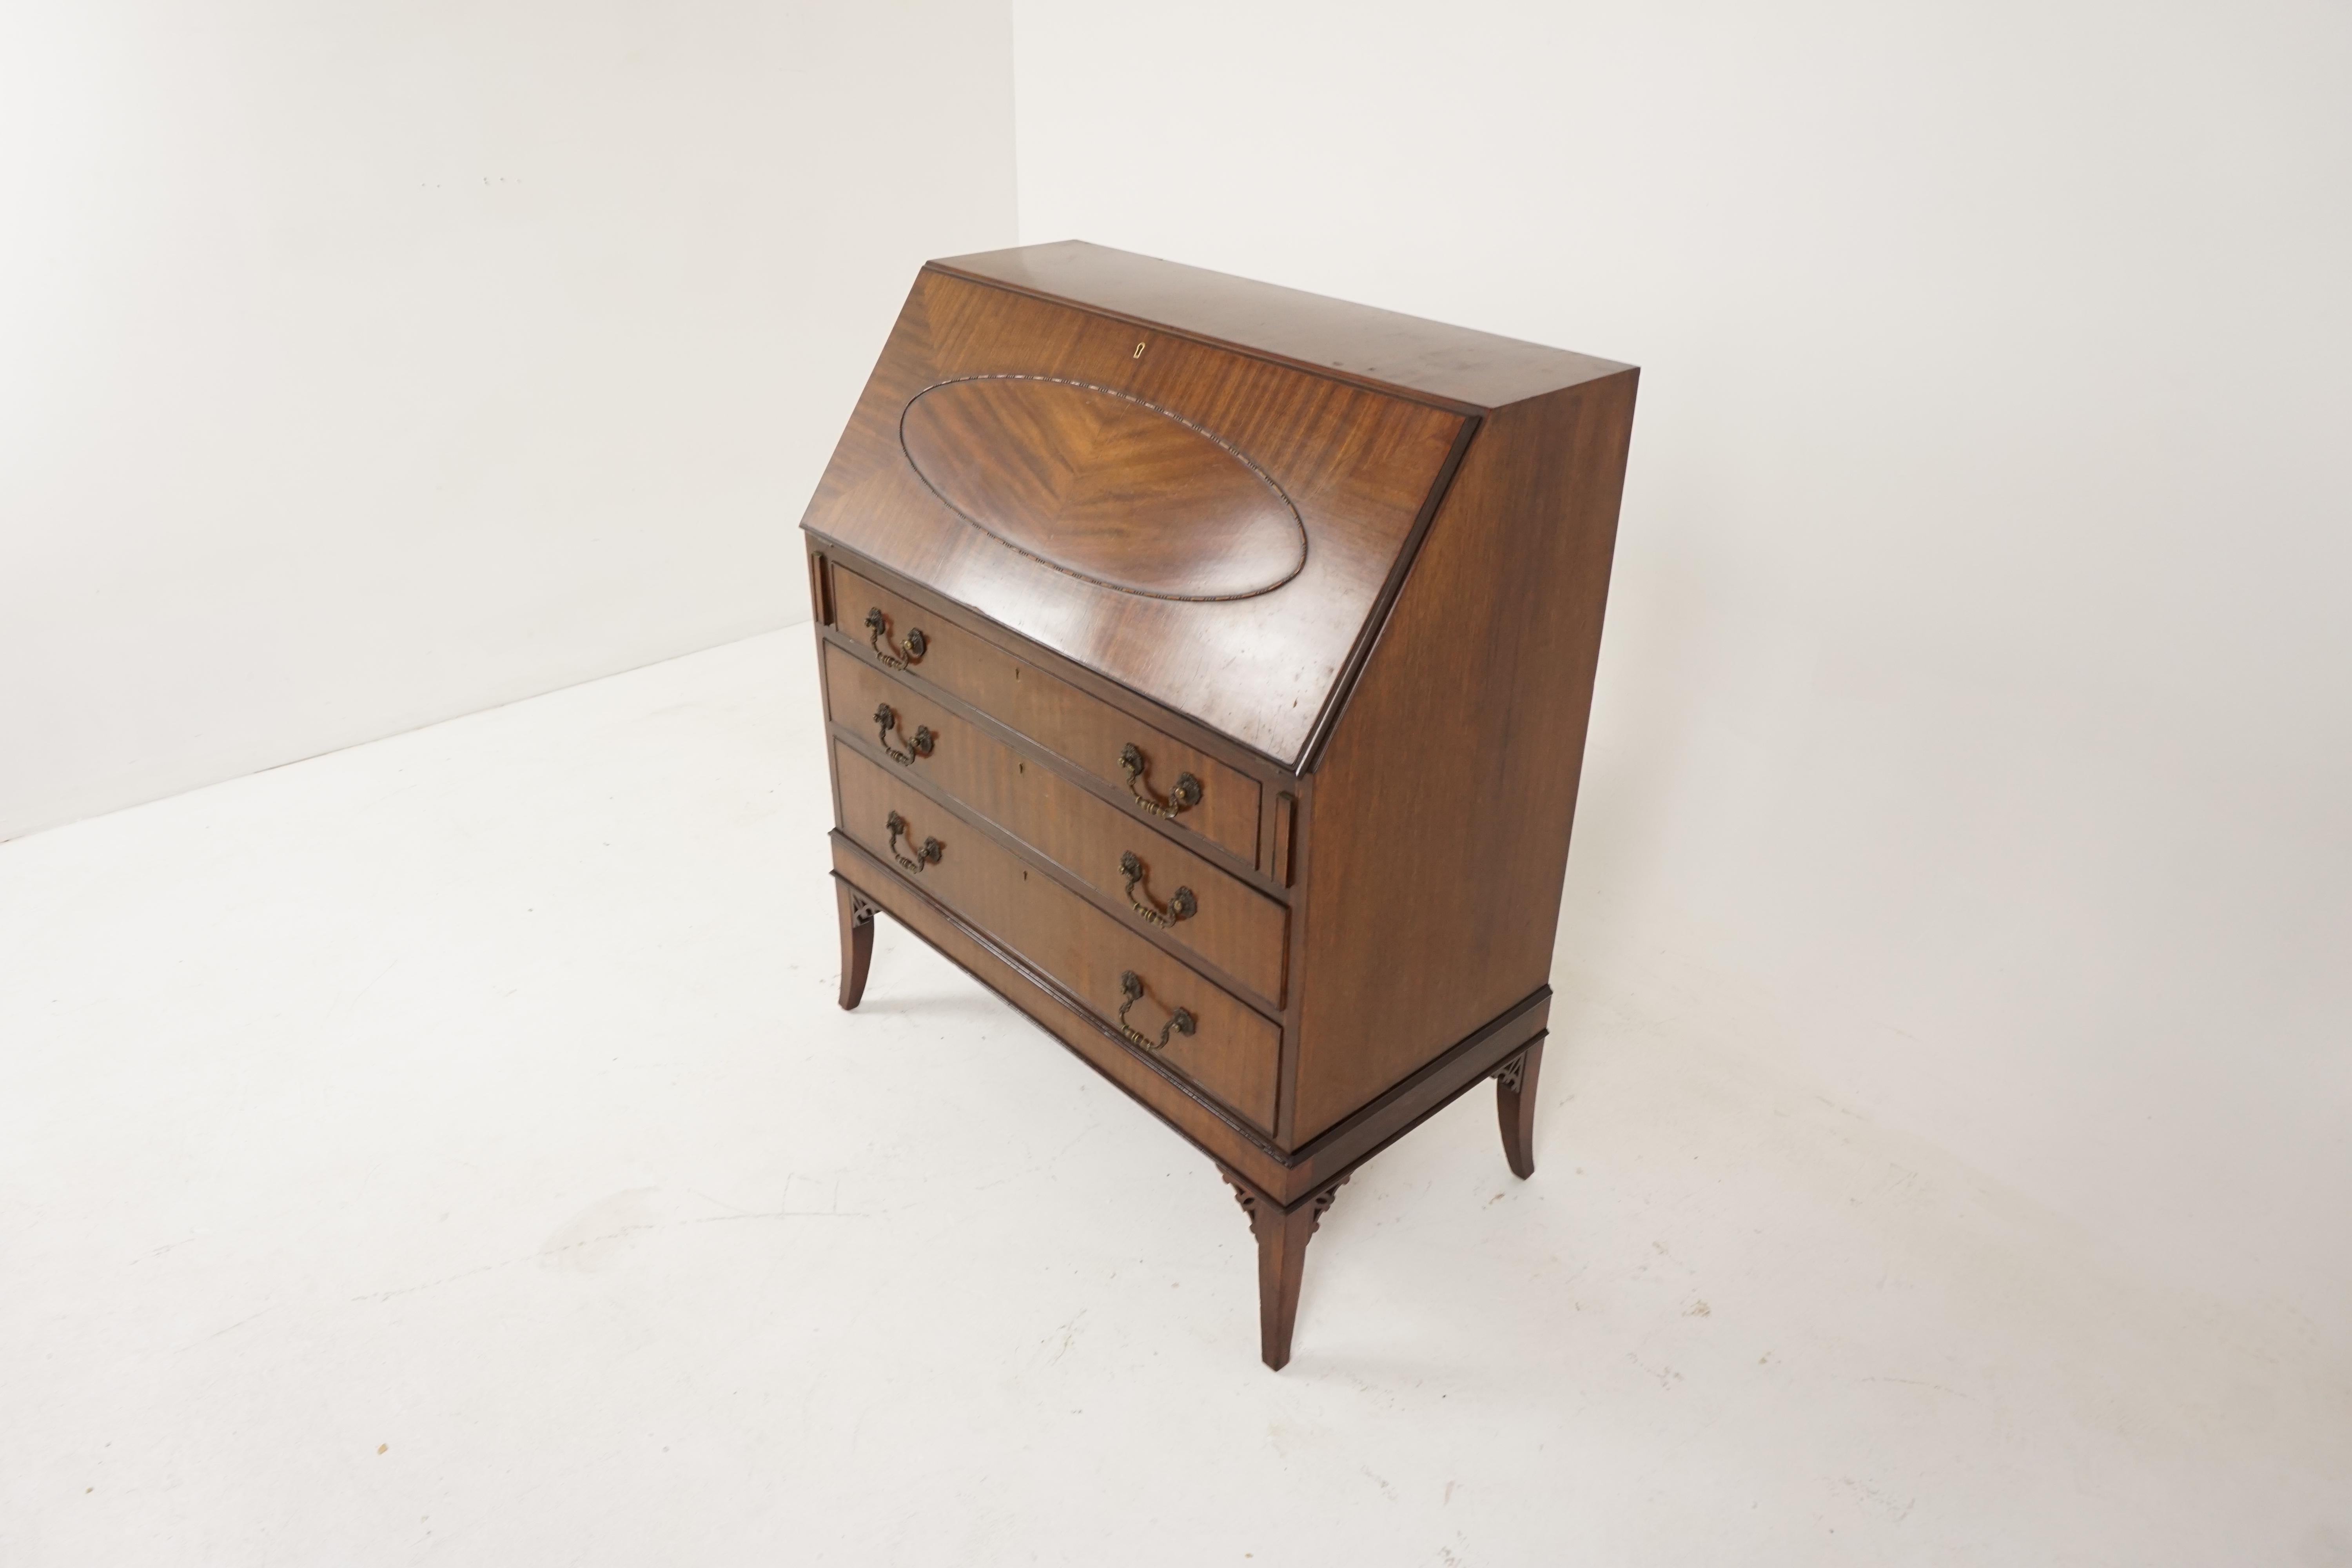 Antique mahogany desk, drop front writing desk, Scotland 1920, B2172

Scotland, 1920
Solid mahogany + veneers
Original finish
Rectangular top
Oval moulding to the fold down front
Opens to reveal a quality fitted interior
Leather writing